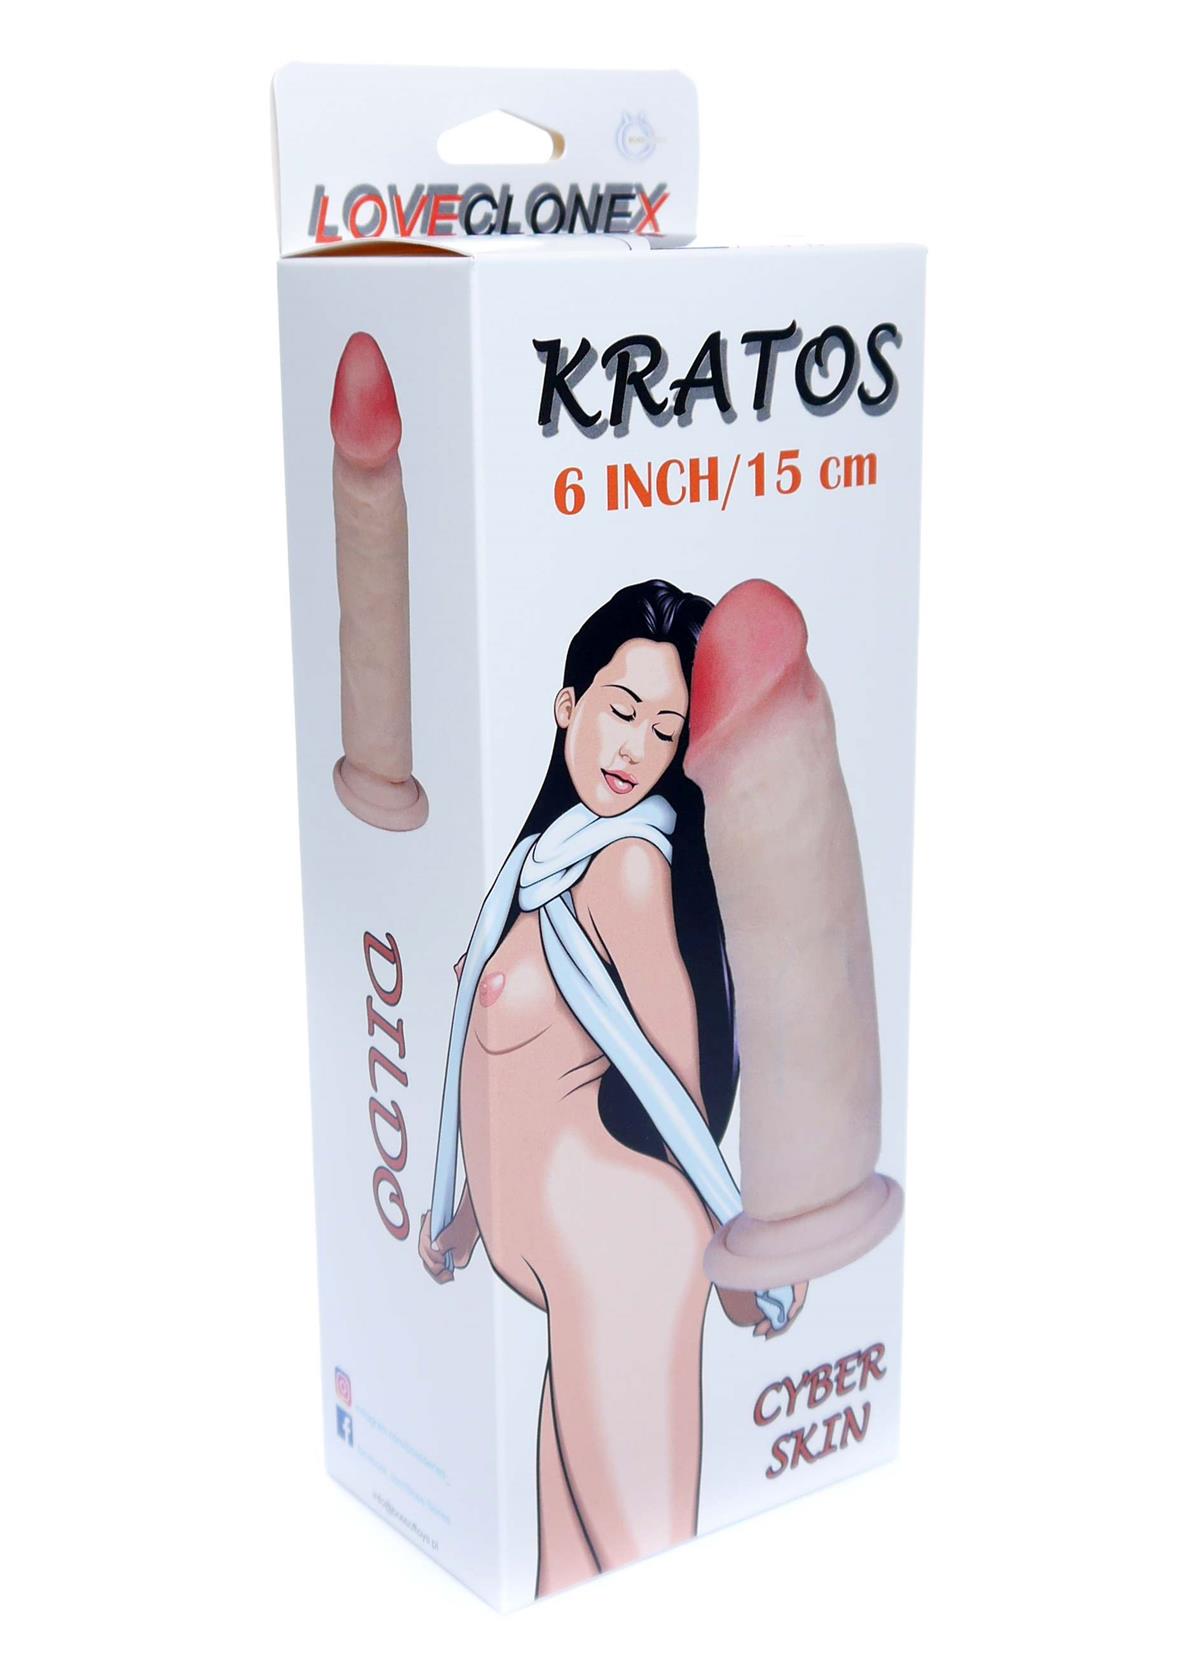 Bossoftoys Kratos Loveclonex Ultra Realistic Dildo - Cyber skin feels like real - 21-00032 - 4,8 cm thick - Suction Cup - 6 inch / 15 cm